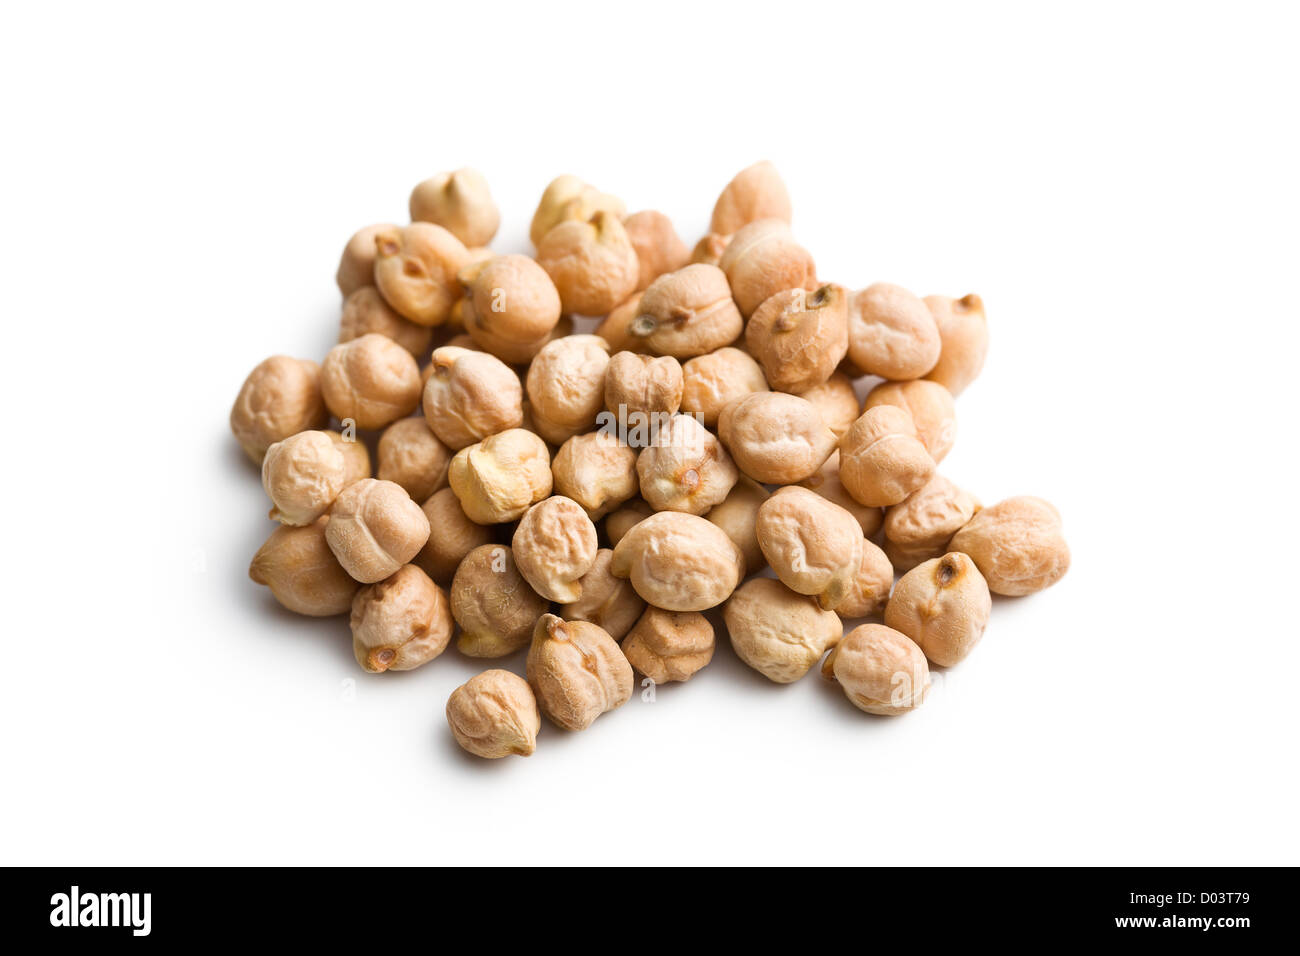 the chickpeas on white background Stock Photo